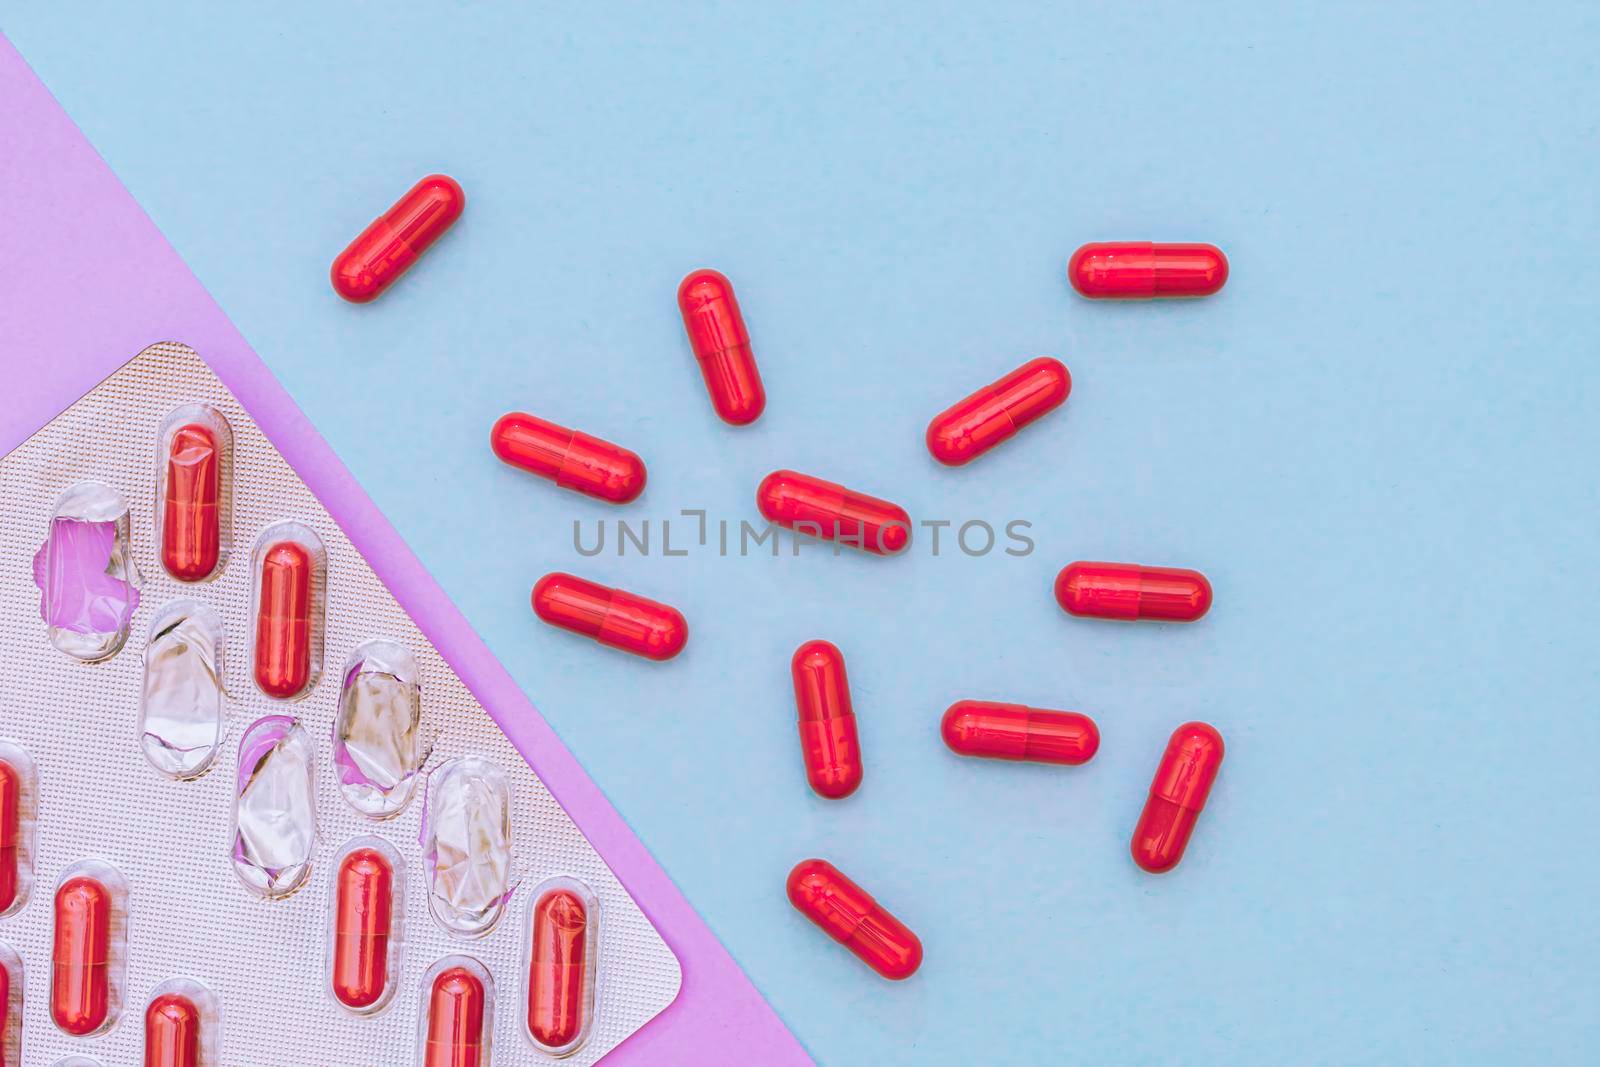 Medicines in red capsules for weight loss and treatment.